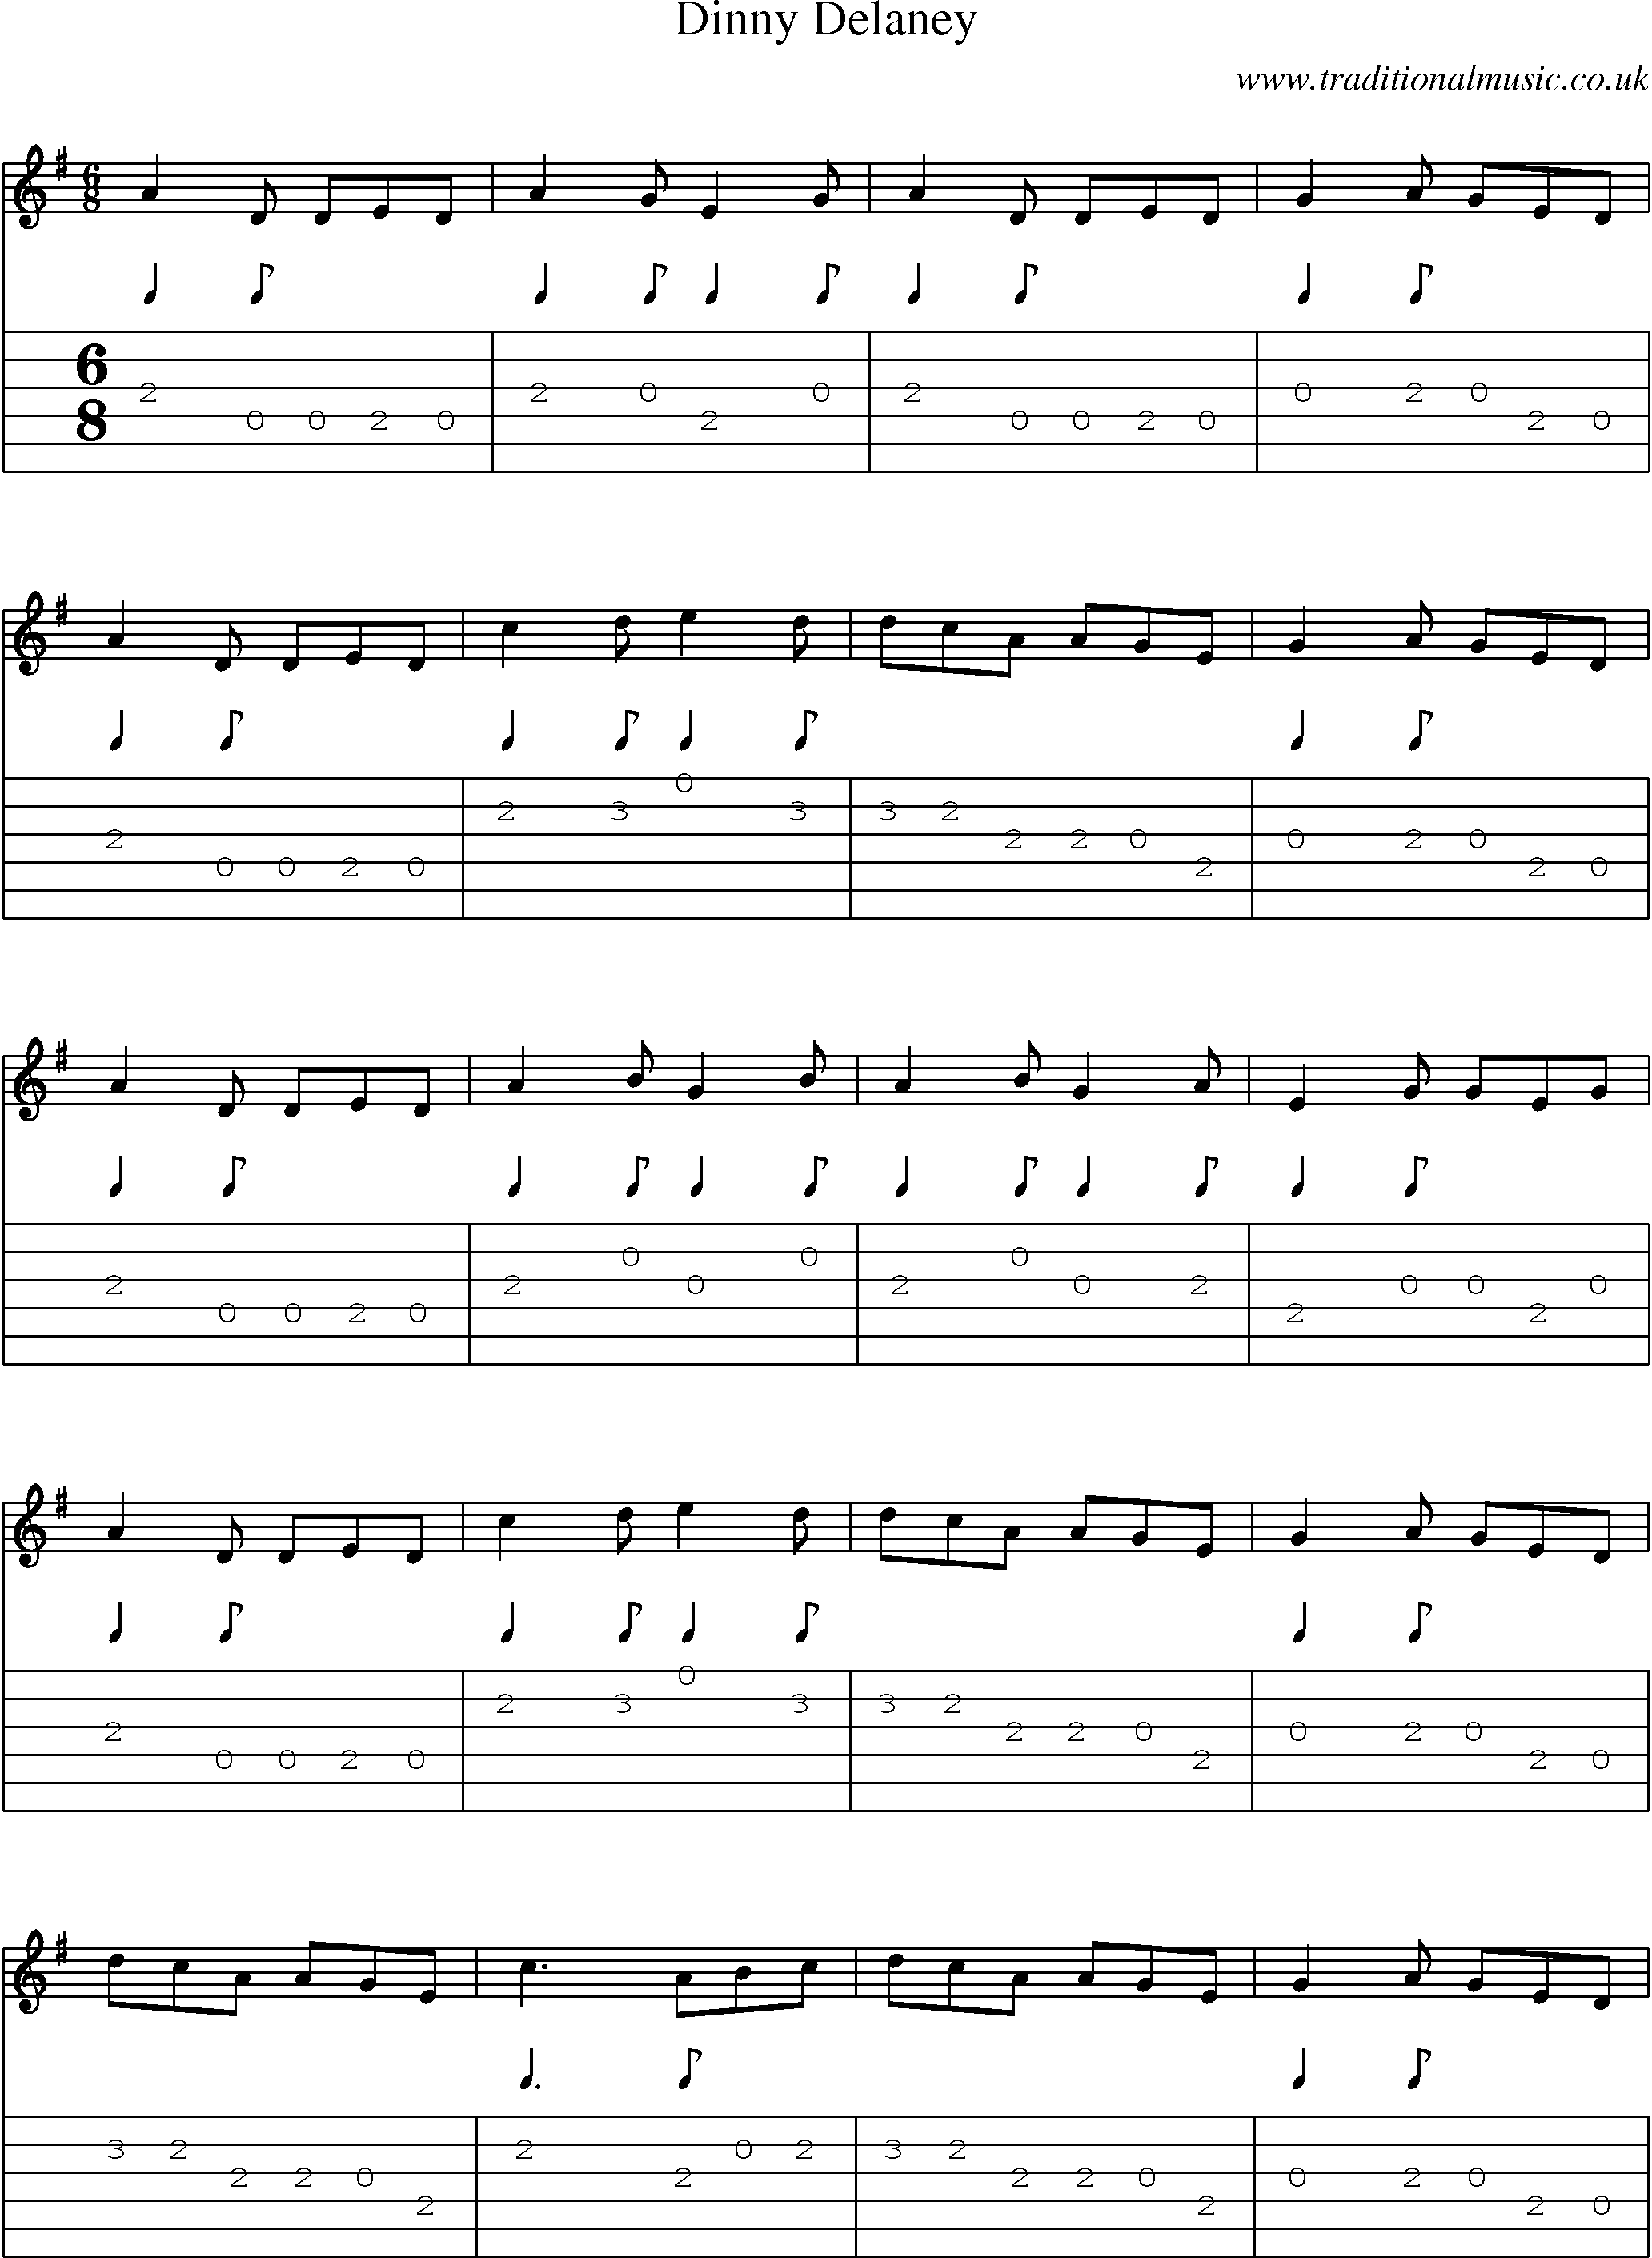 Music Score and Guitar Tabs for Dinny Delaney